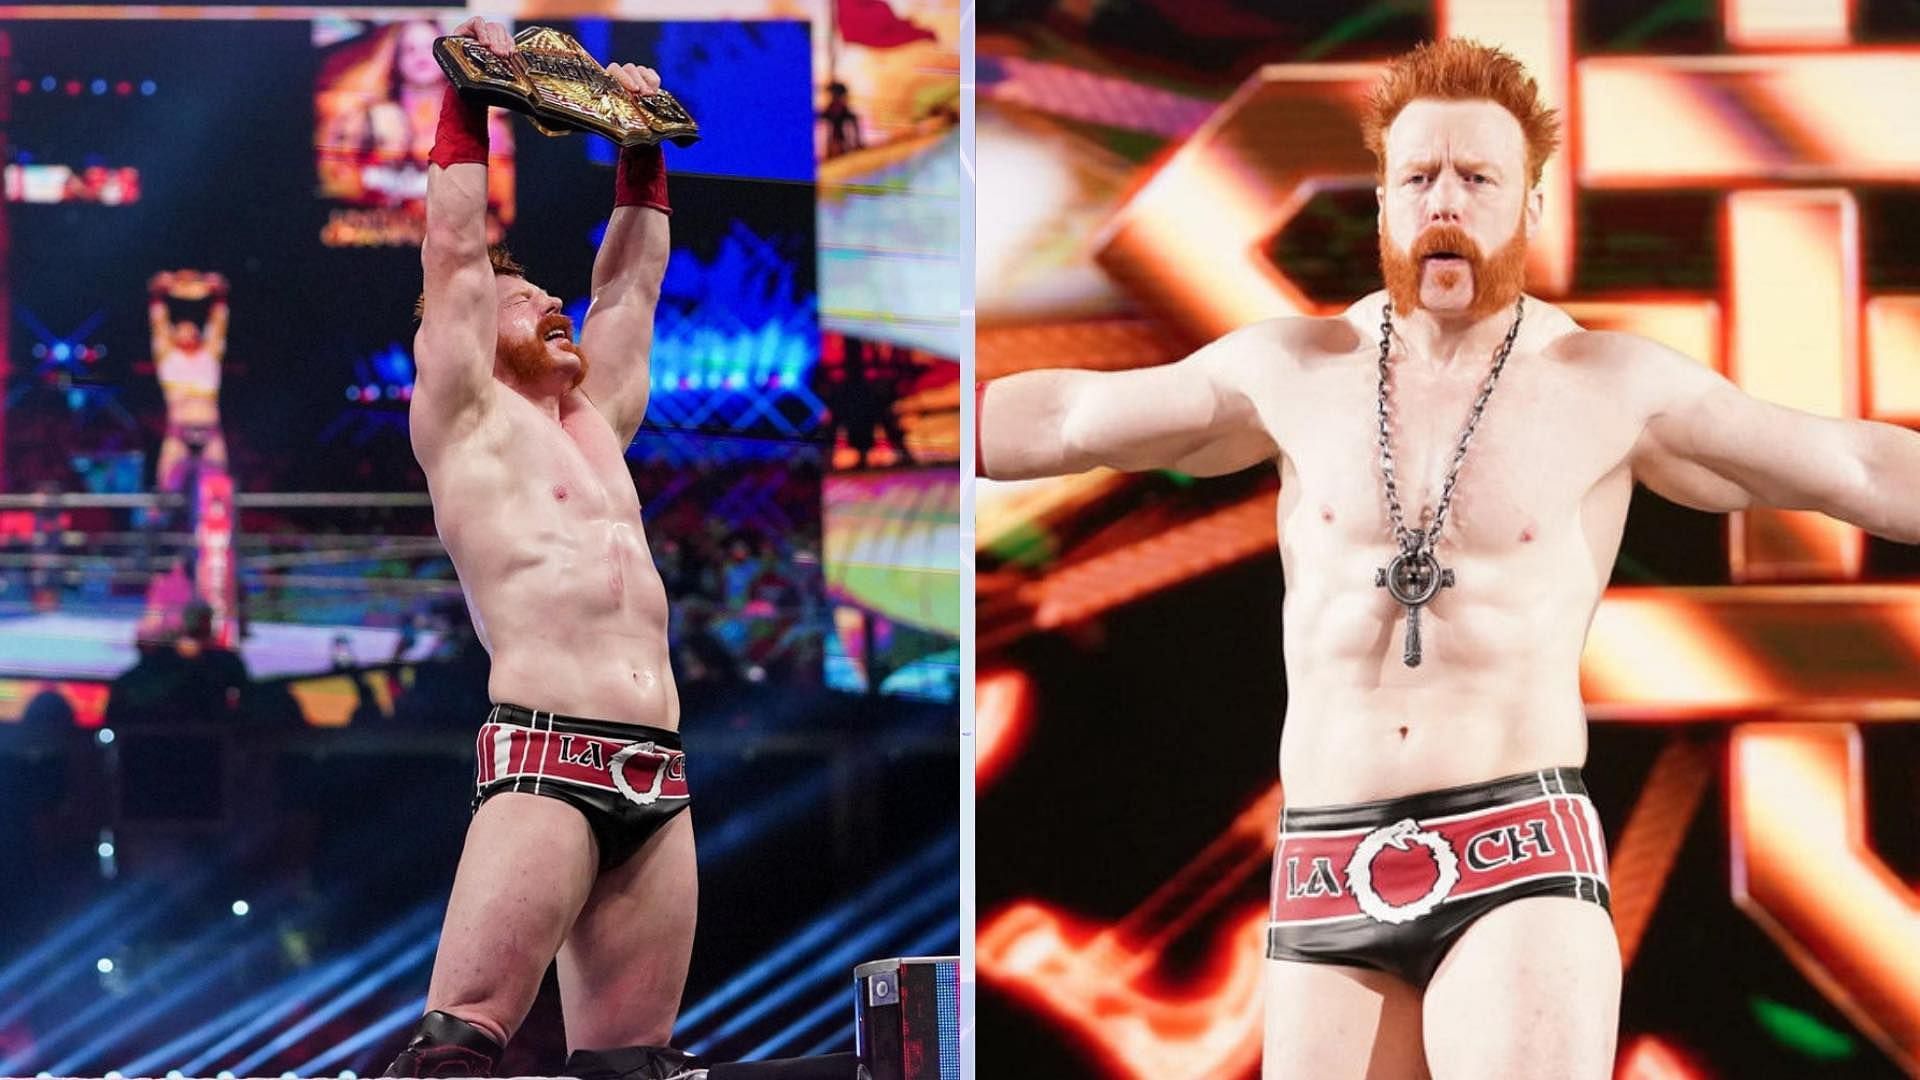 Sheamus is a Grand Slam Champion in WWE.